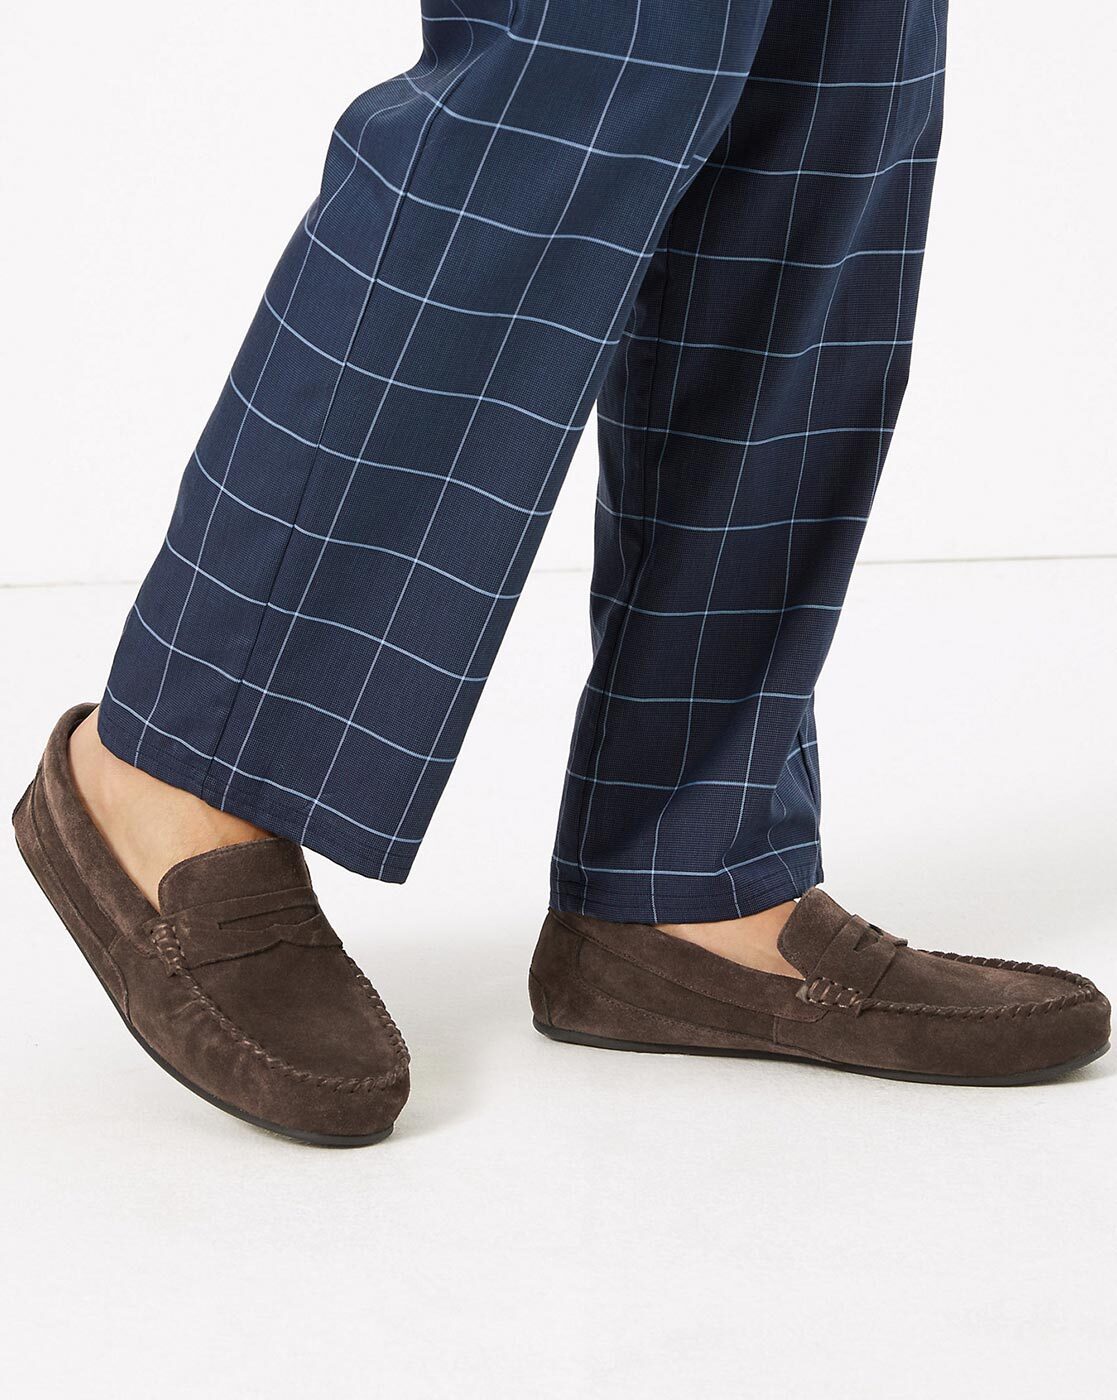 mens boat shoes marks and spencer